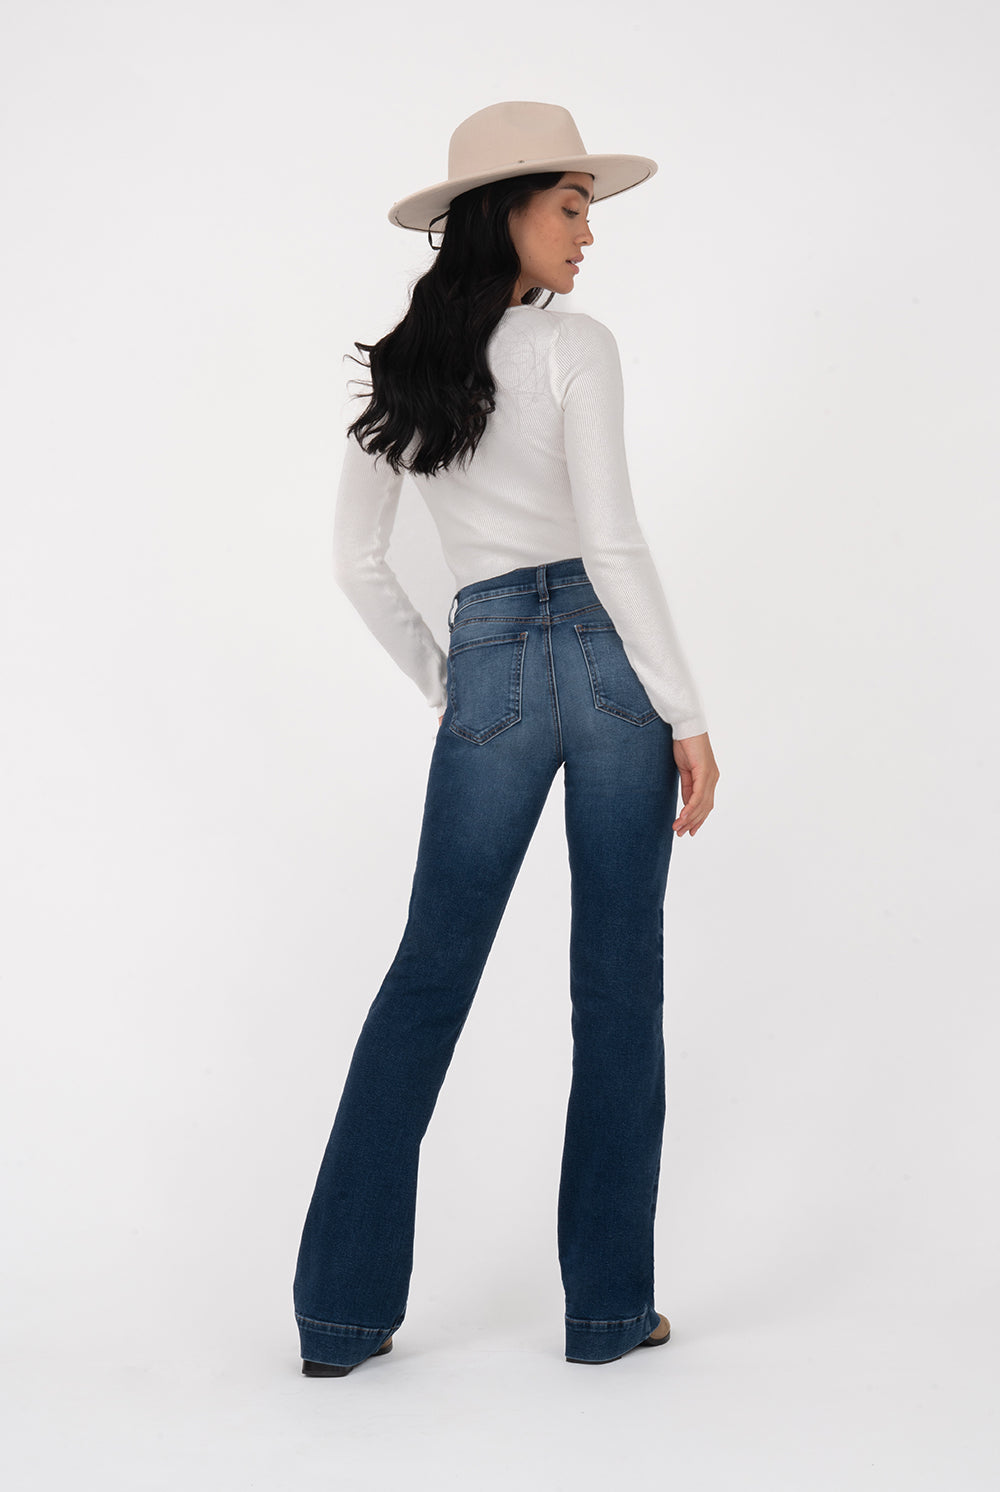 Lenor Bootcut-Denim-Vixen Collection, Day Spa and Women's Boutique Located in Seattle, Washington